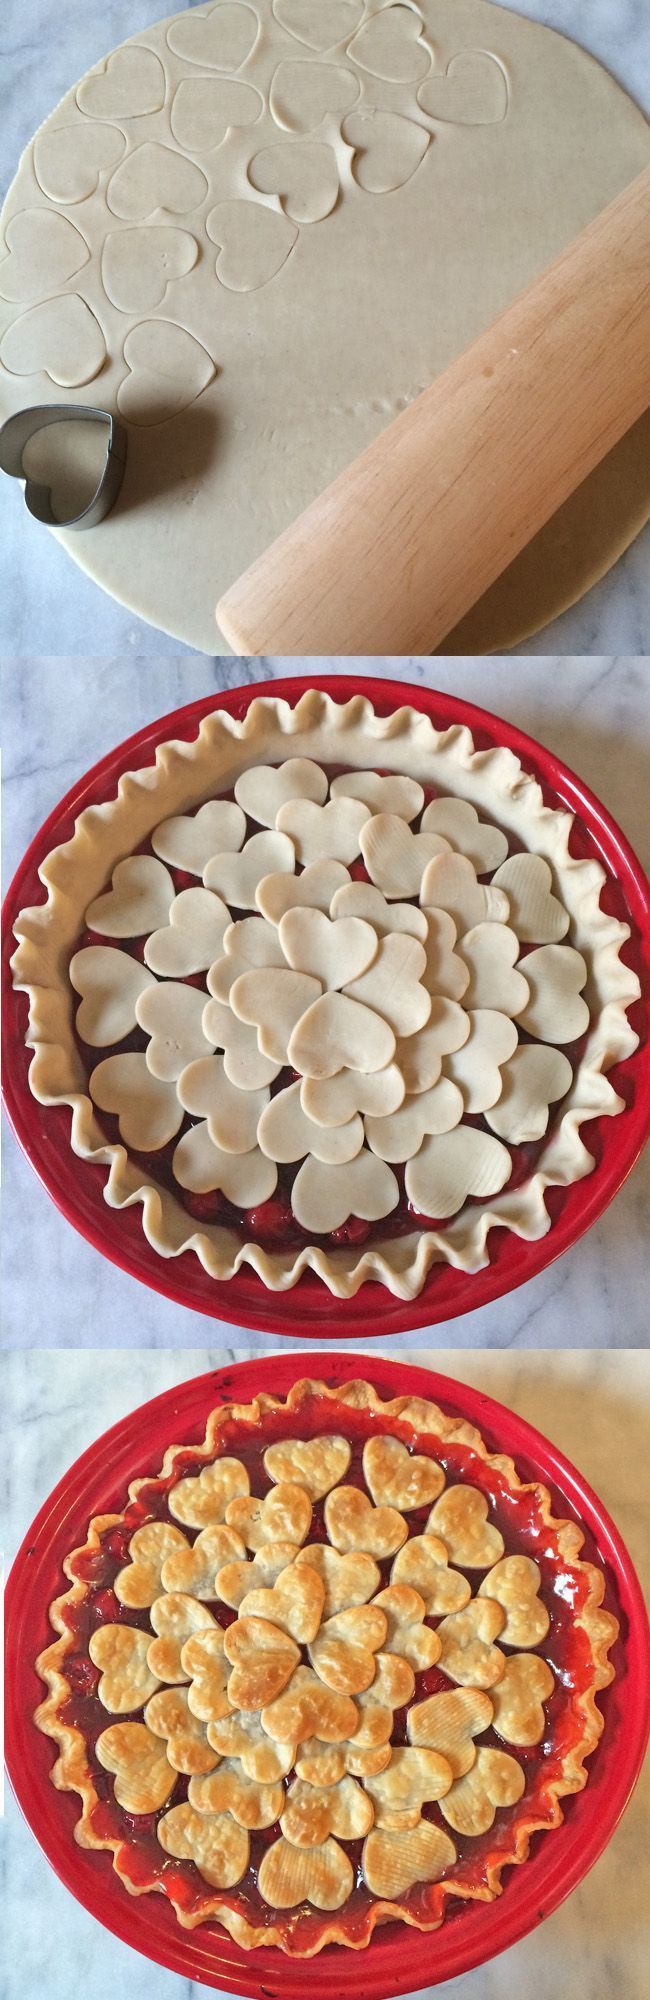 Heart pie! Click through for 35 amazing, over-the-top Valentines Day ideas, including Valentines crafts, Valentines recipes, and